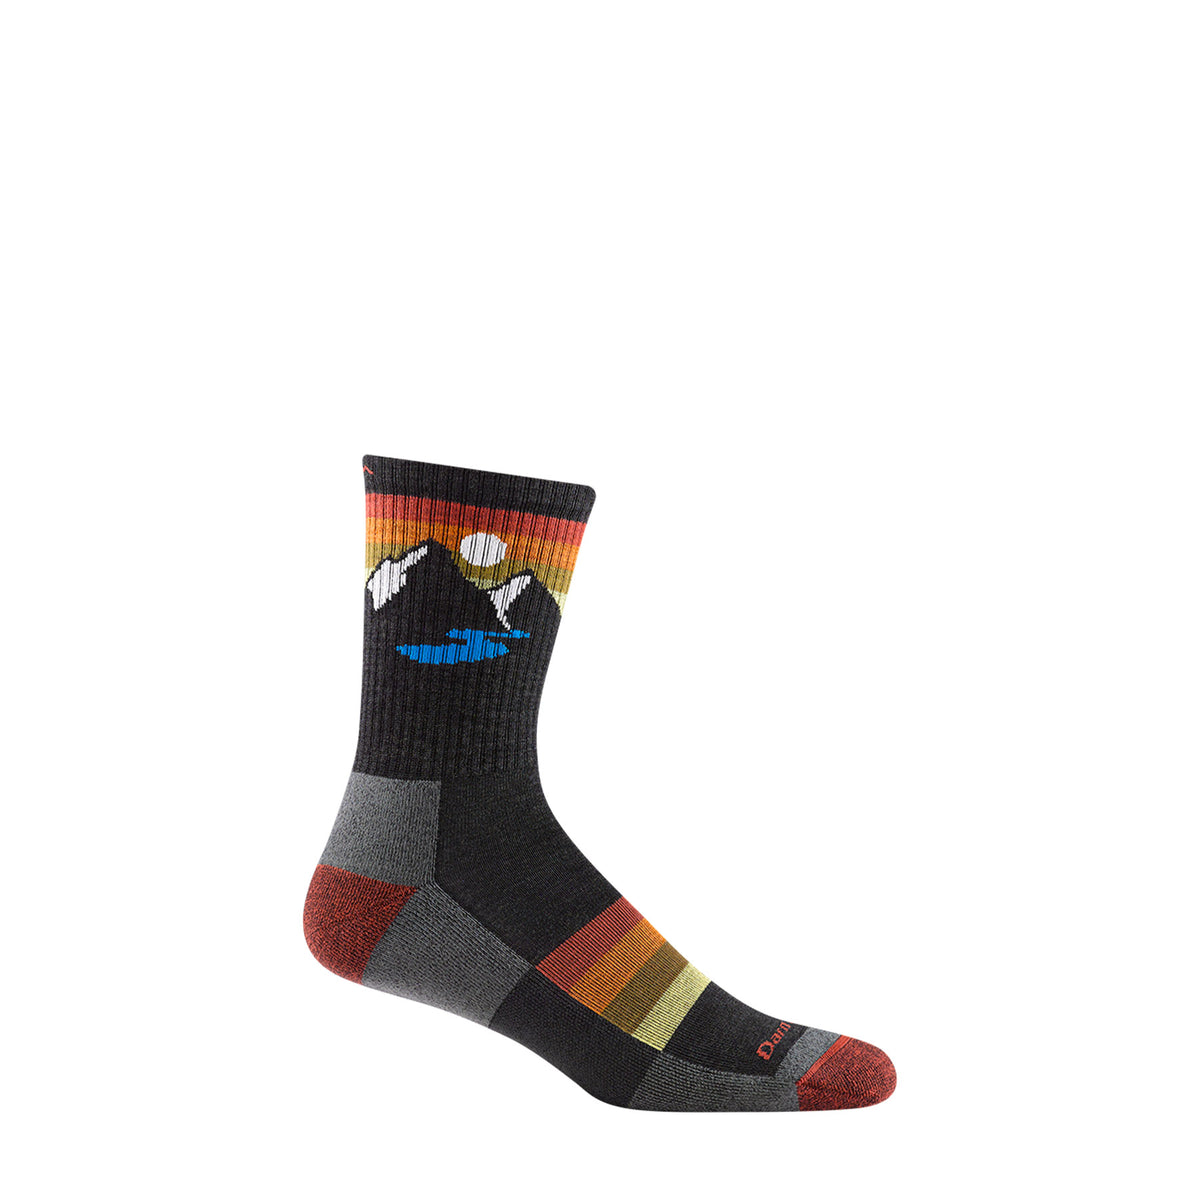 Hero image featuring Darn Tough's Sunset Ridge Micro Crew sock in charcoal with a mountain range image across the high ankle, and red, orang, brown, and muted yellow stripes across the top of the foot.